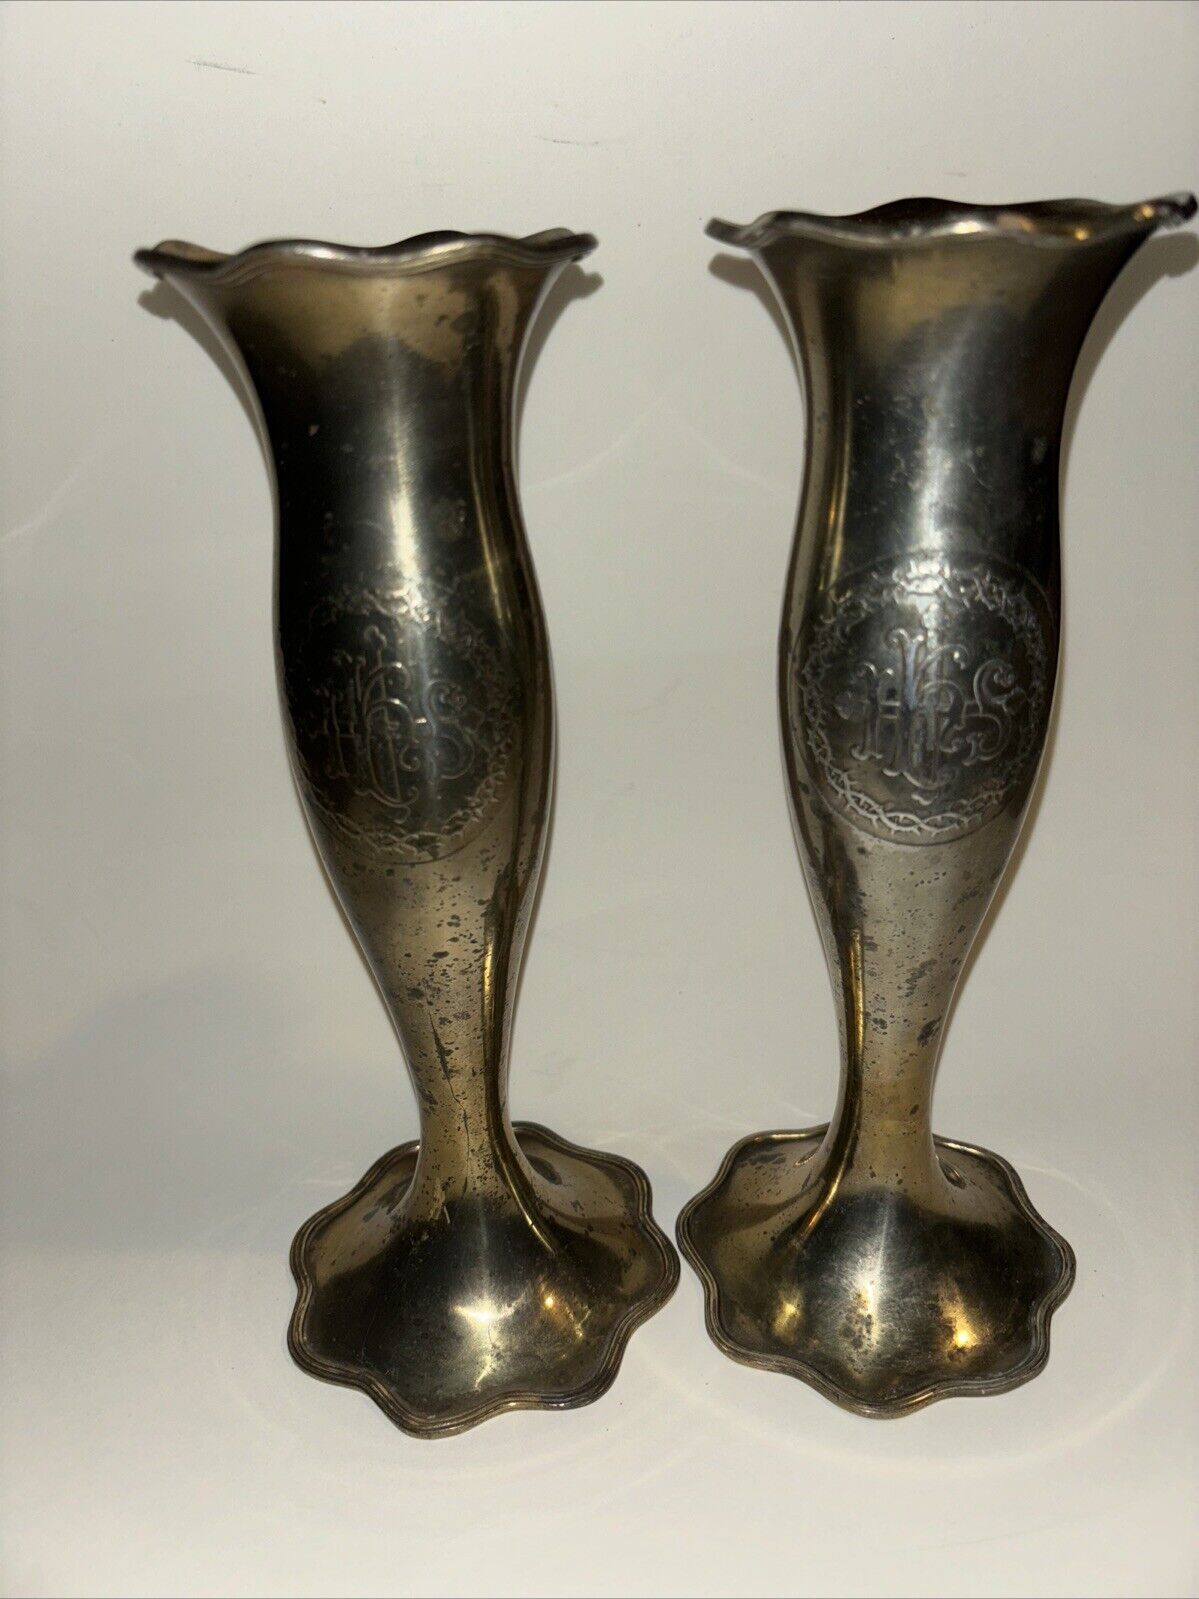 Pair of Antique Trumpet Style Church Flower Vases, 10 Inches E1301 chalice co